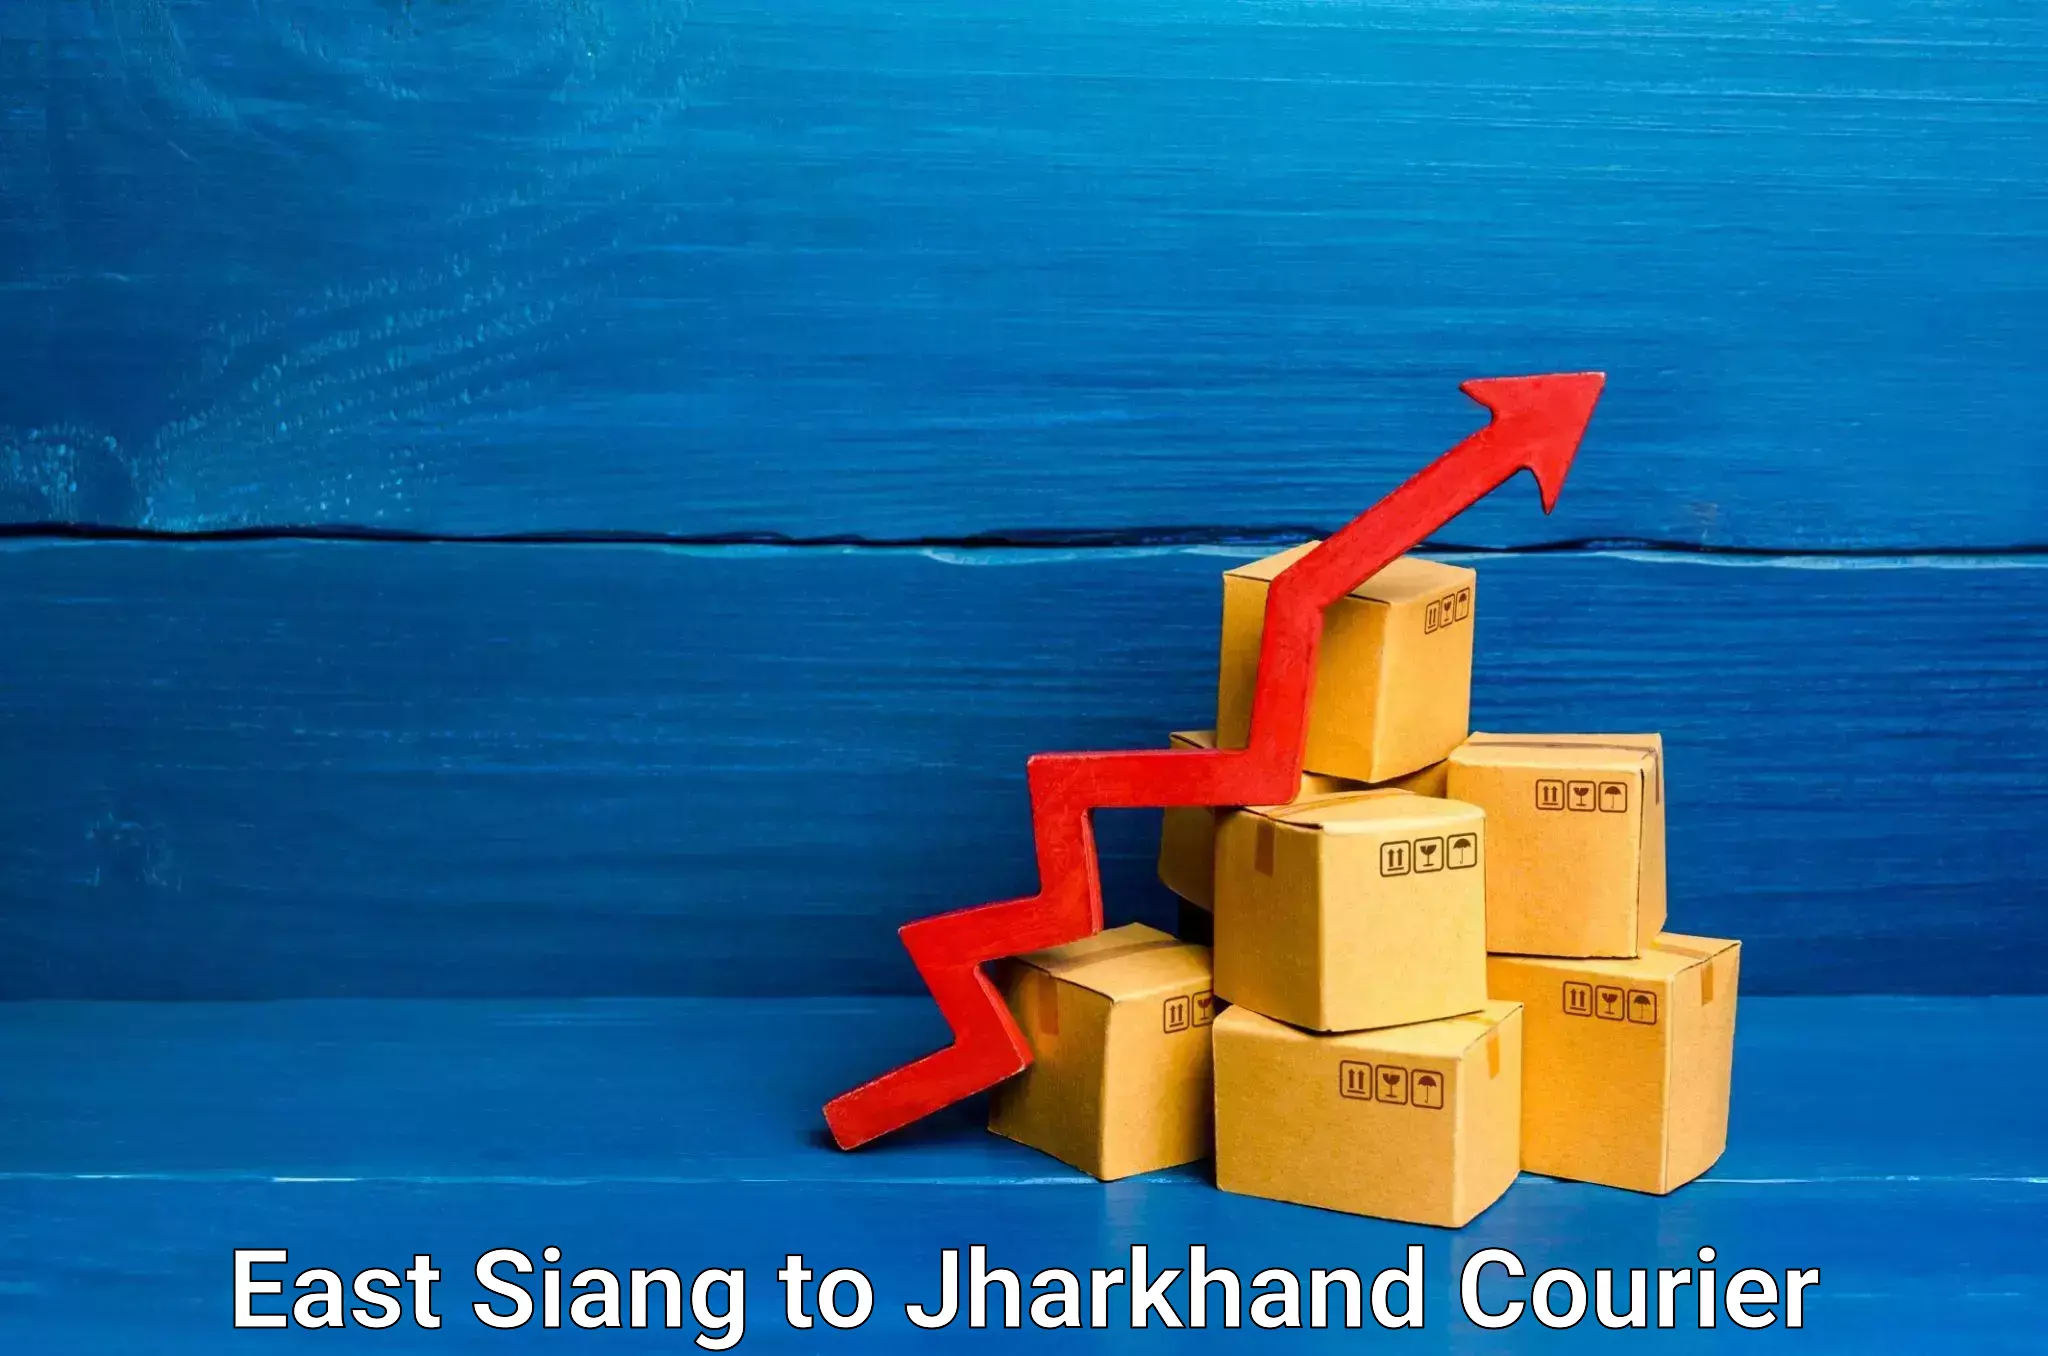 Flexible delivery schedules East Siang to Jamshedpur